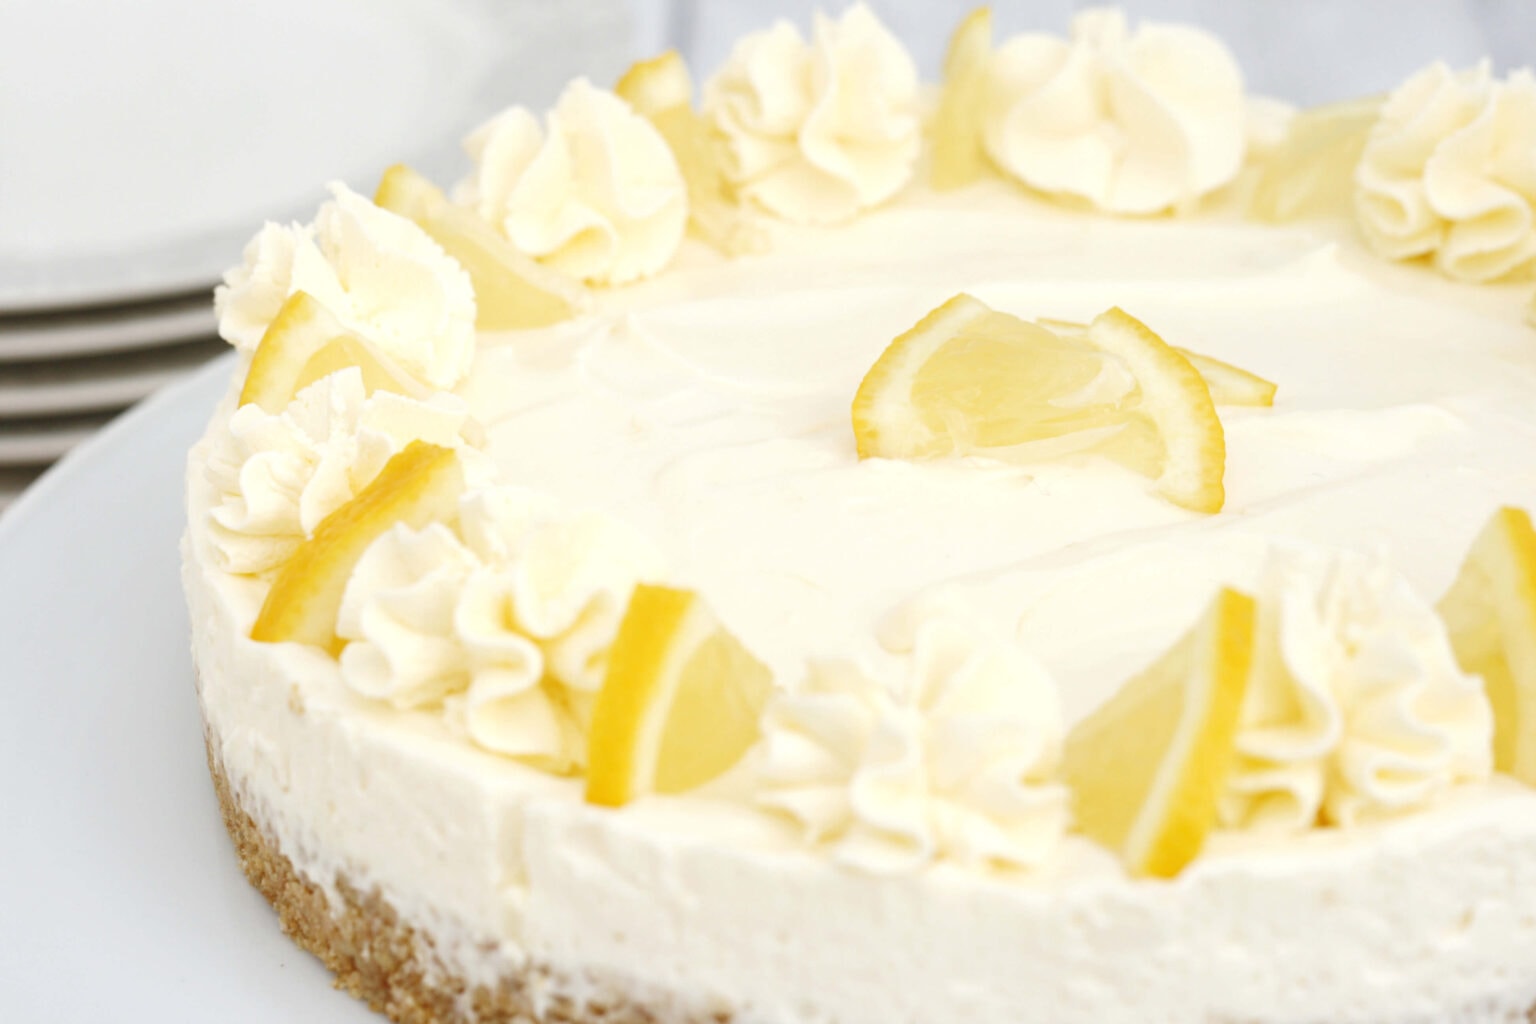 This easy chilled no bake Mary Berry lemon cheesecake is a great 